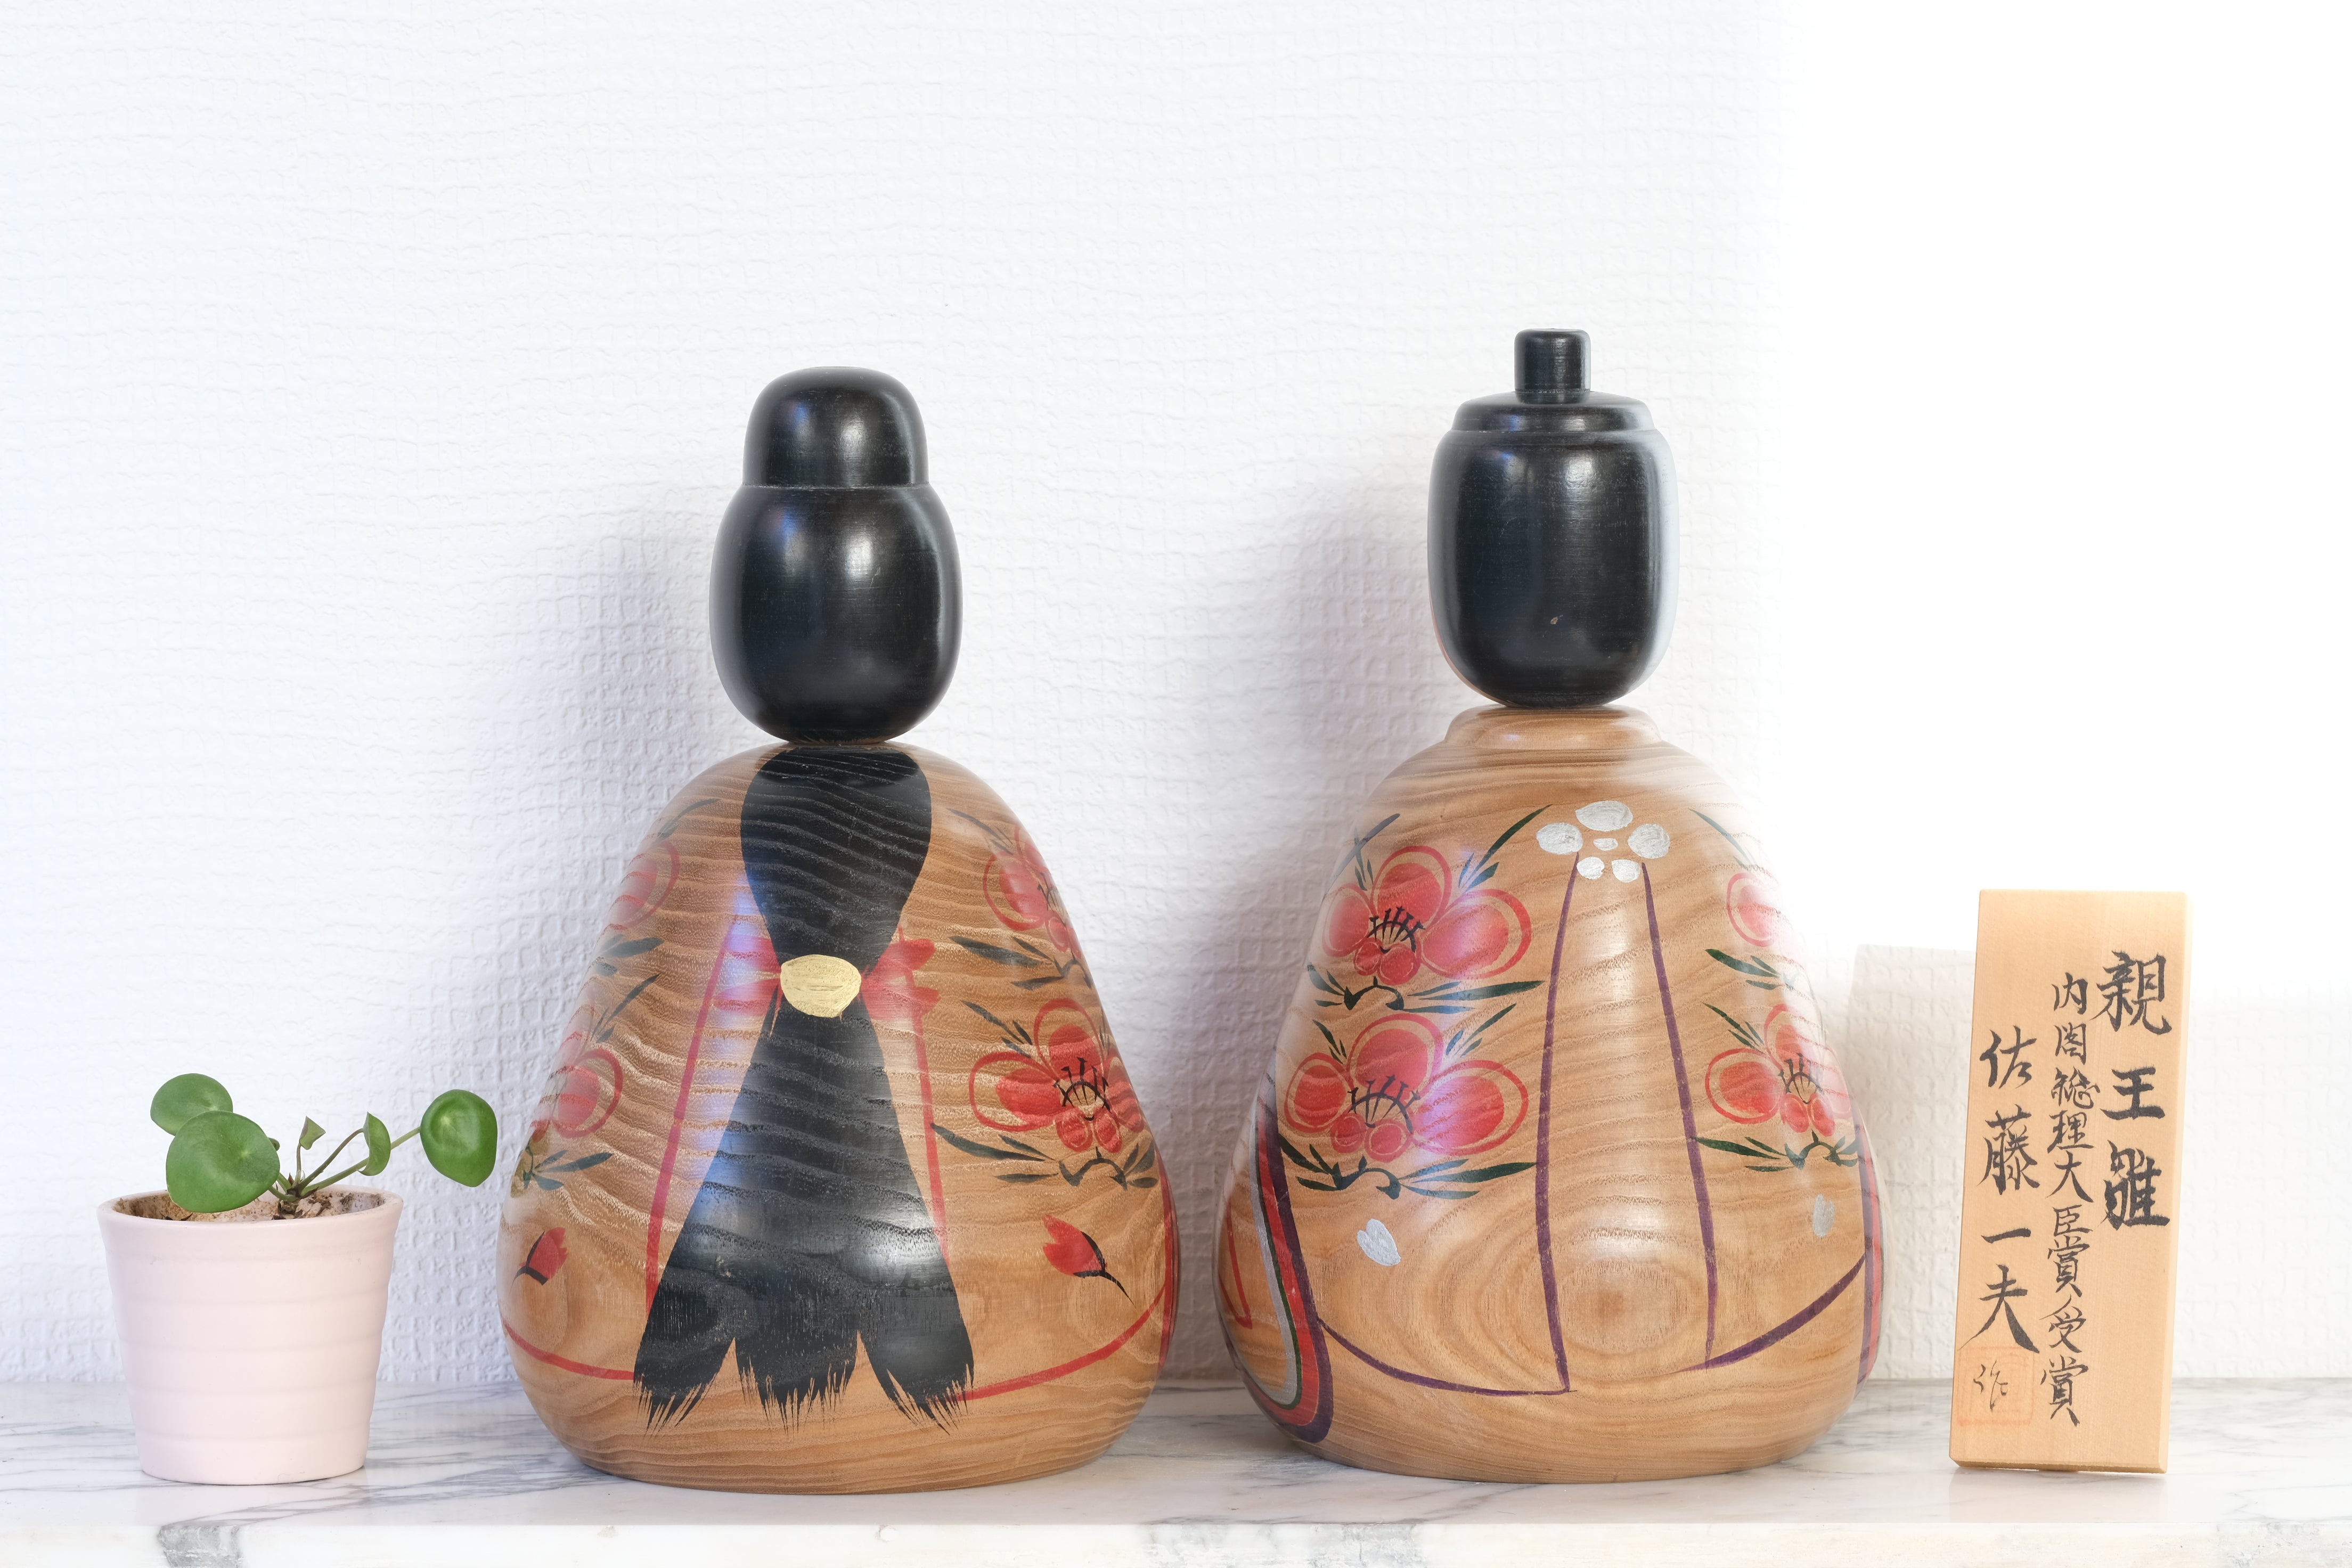 Exclusive Pair of Vintage Togatta Kokeshi by Sato Kazuo (1936-) | Imperial Couple | 24 cm and 25 cm